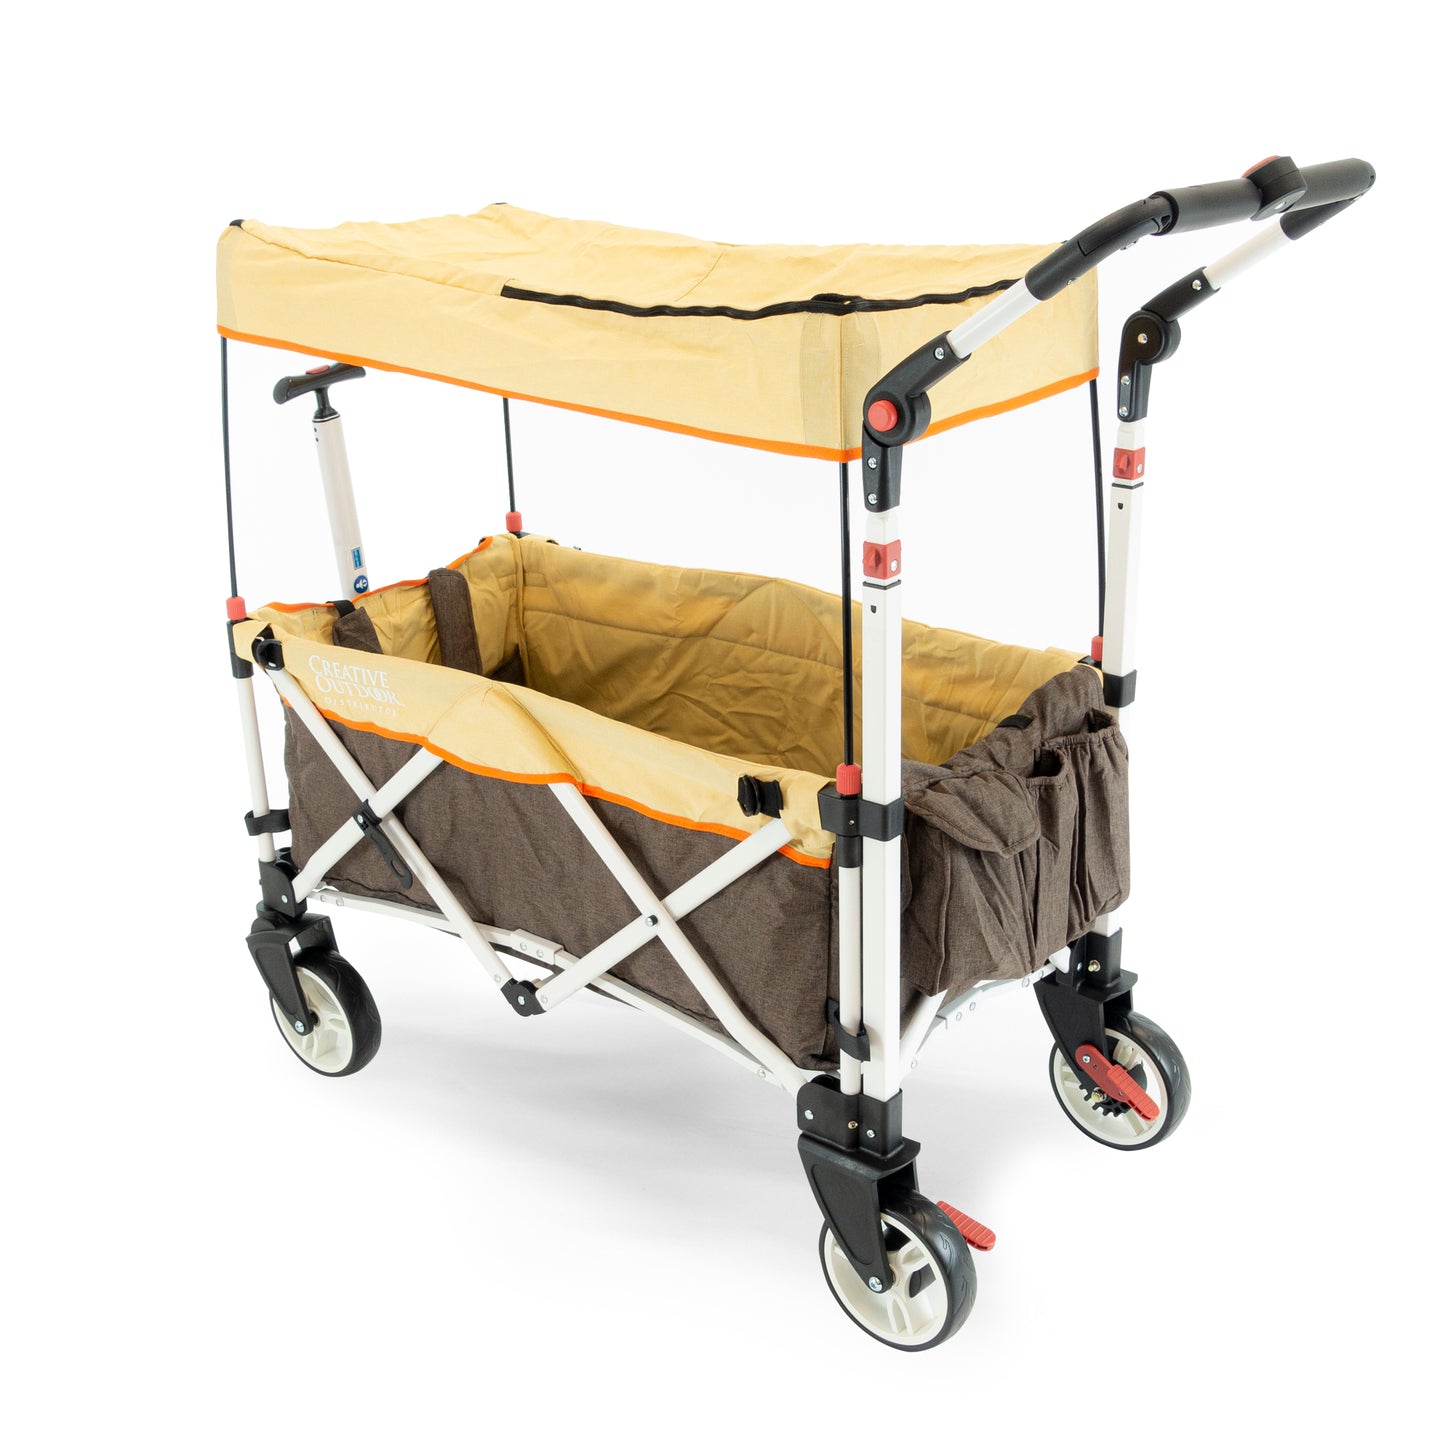 pack-and-push-folding-stroller-wagon-brown-tan